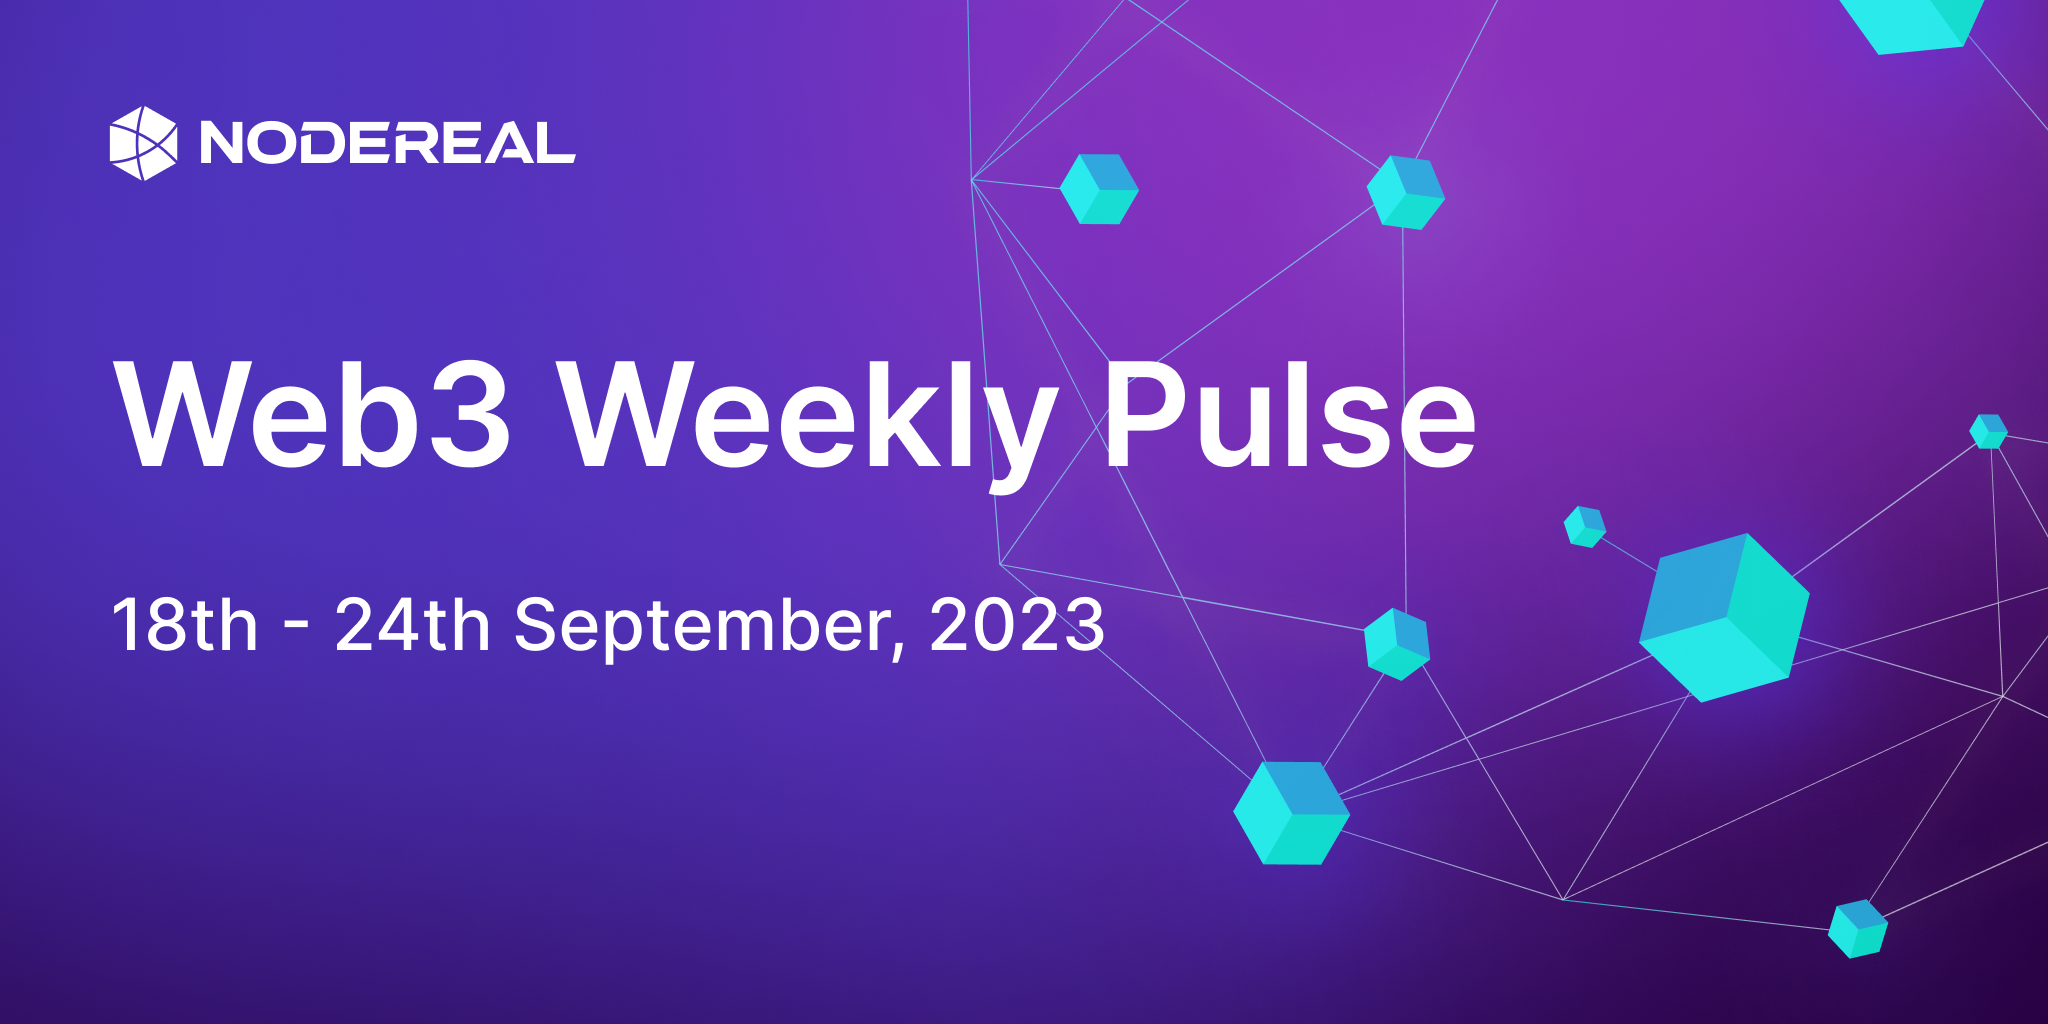 Web3 Weekly Pulse: 18th - 24th September